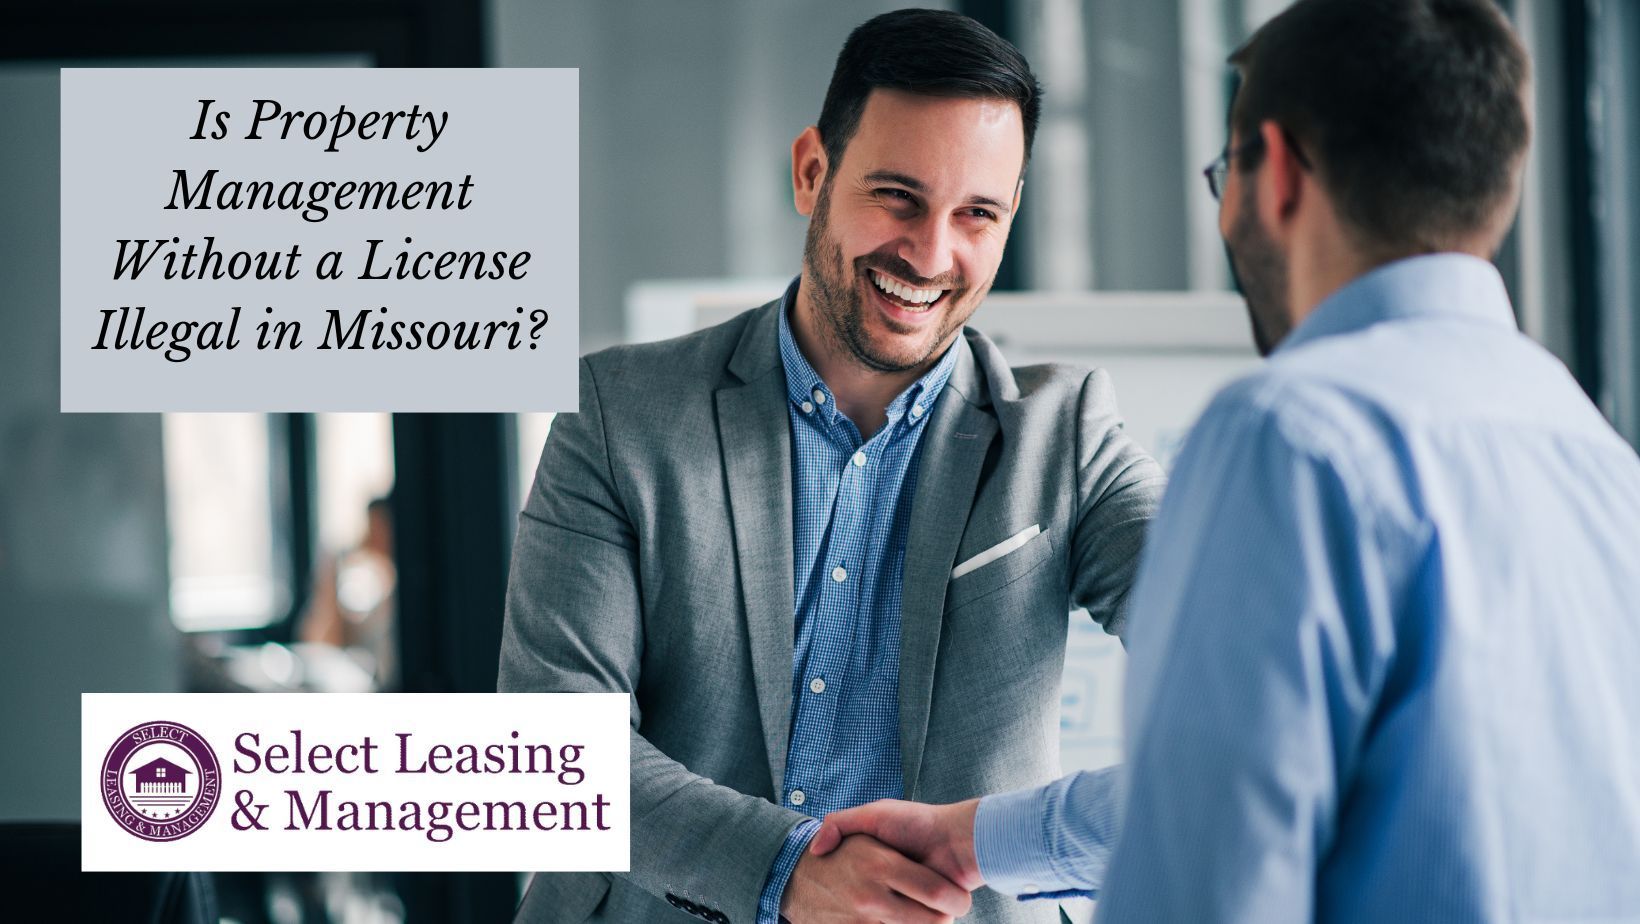 Is Property Management Without a License Illegal in Missouri?